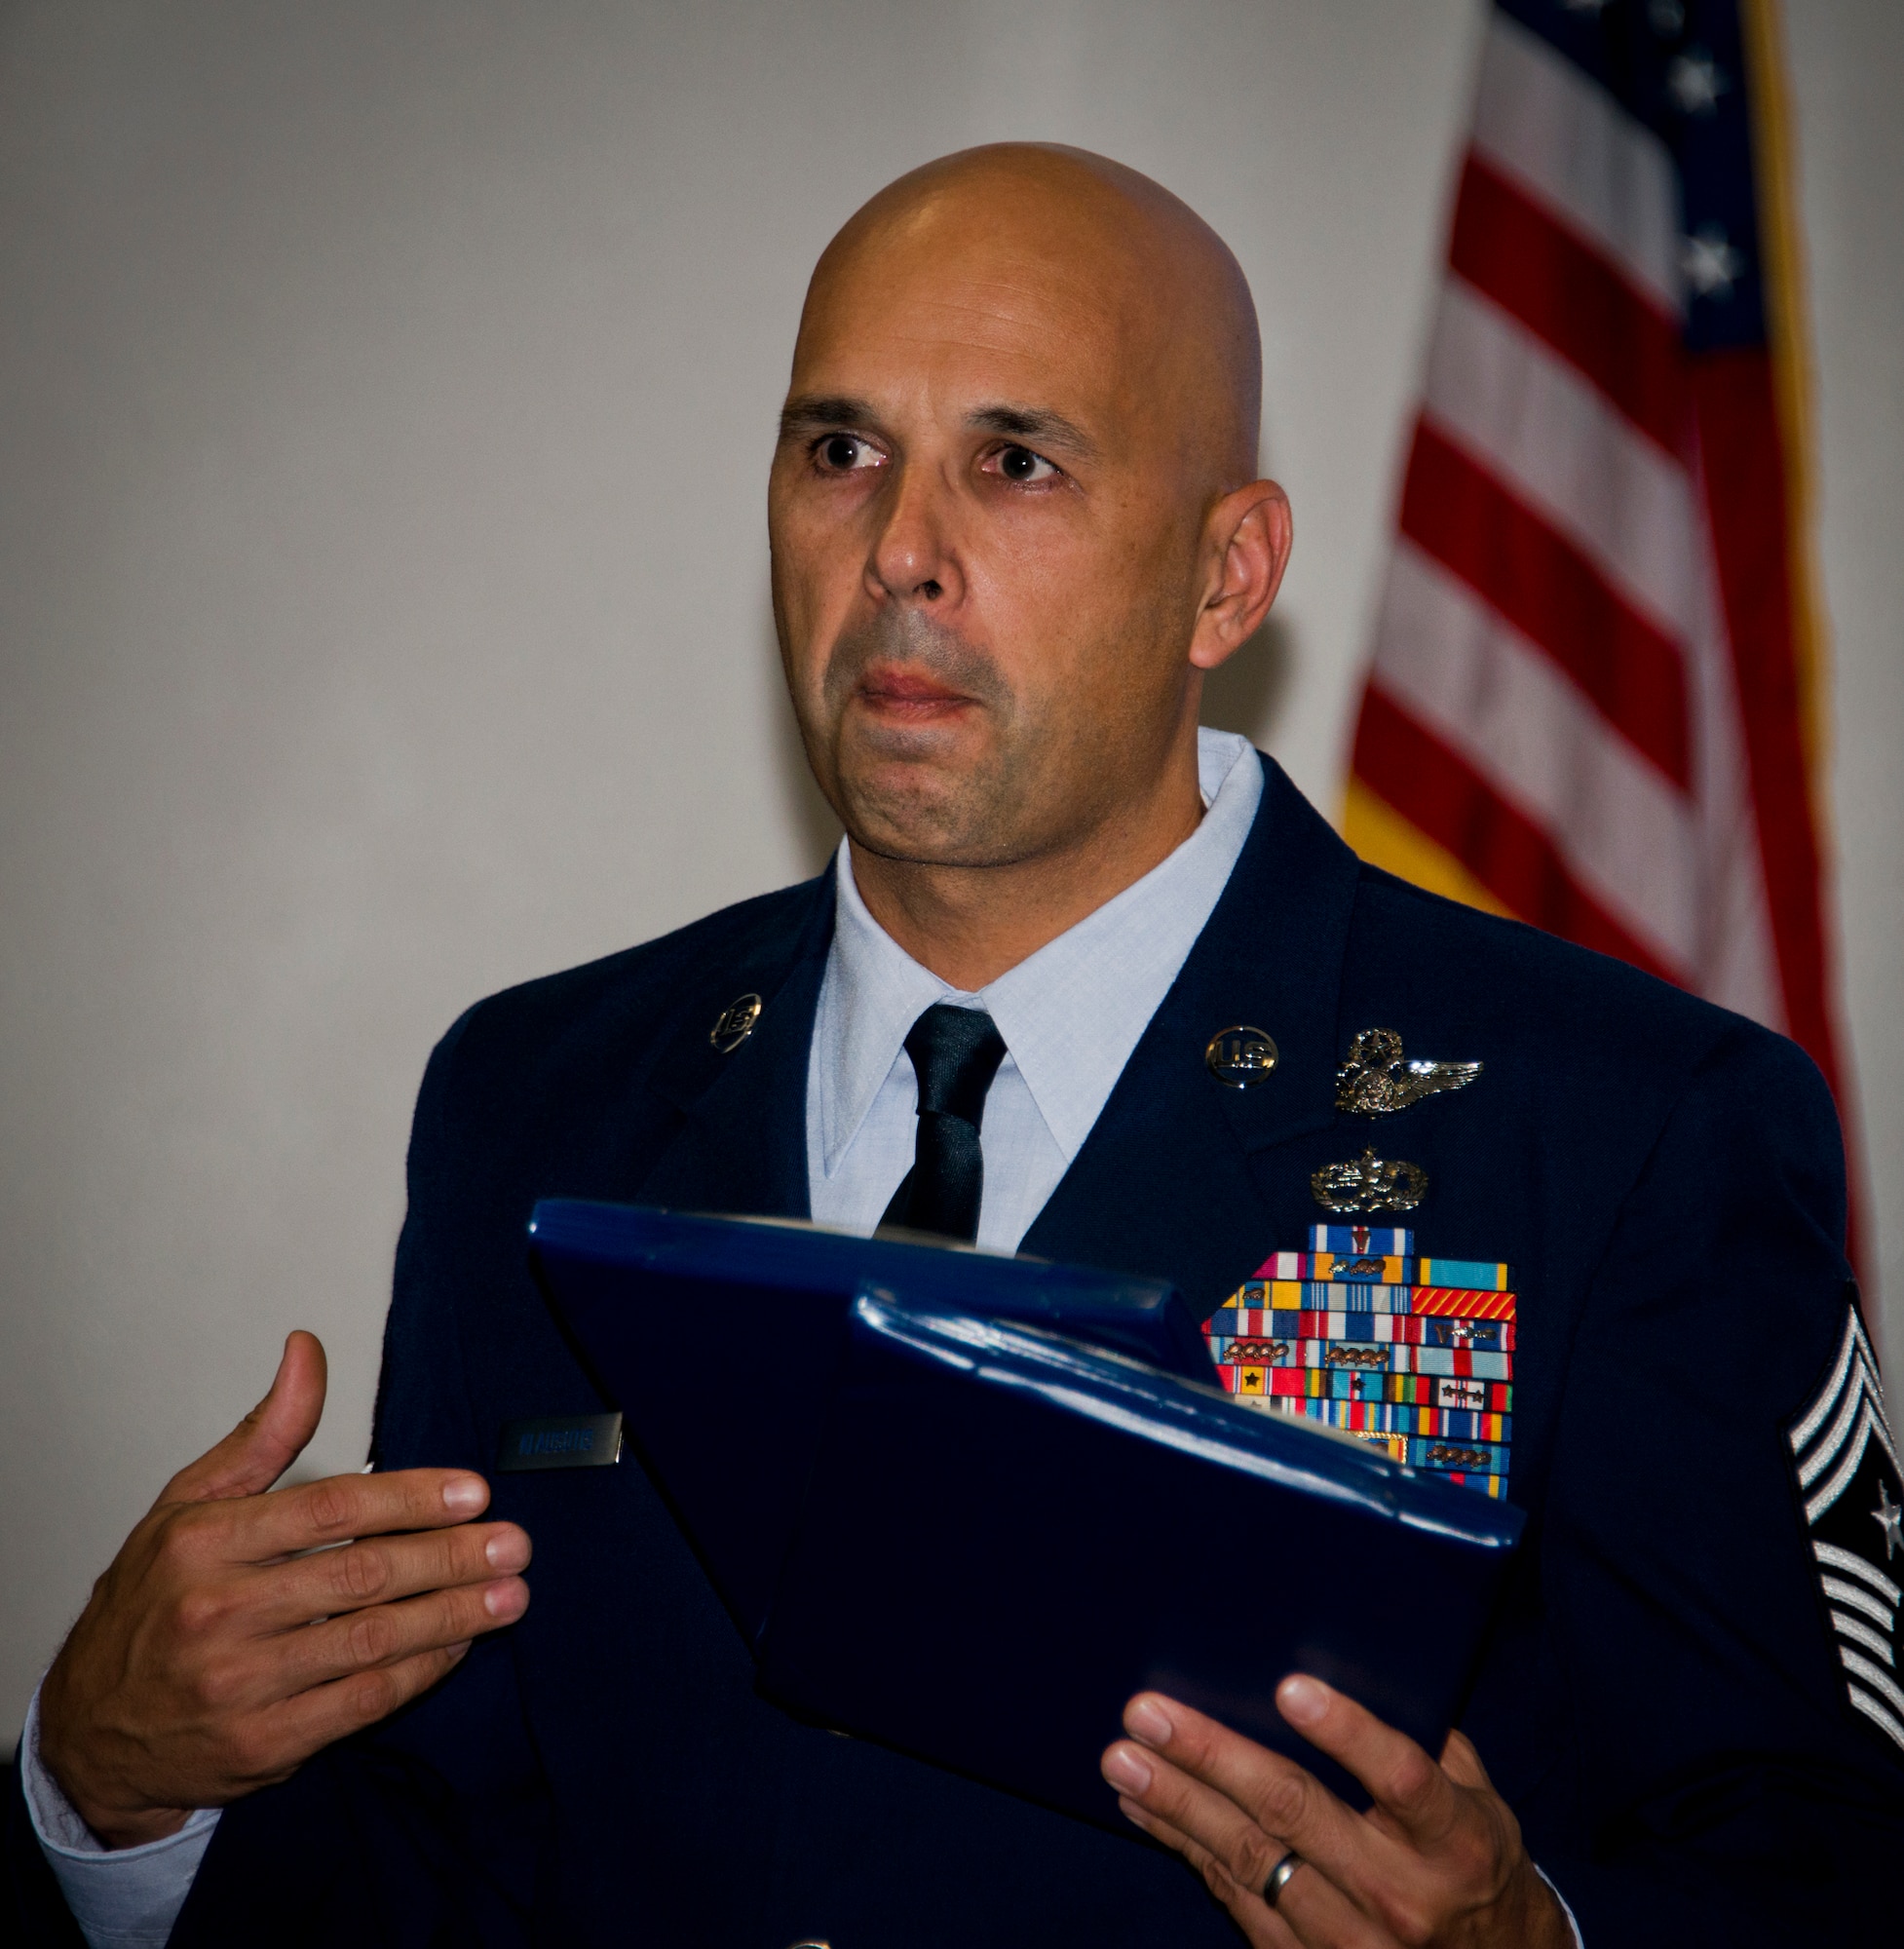 Chief Master Sgt. Michael Klausutis, the 919th Special Operations Wing command chief, fights back emotion while talking about Senior Airman Josh Santos at a memorial held for him Jan. 13 at Duke Field, Fla.  Santos passed away Nov. 26 from colon cancer.  He was a radio operator with the 711th Special Operations Squadron.  During the memorial, it was announced the Duke Field gym would be renamed Santos Strength in his honor.  (U.S. Air Force photo/Tech. Sgt. Samuel King Jr.)